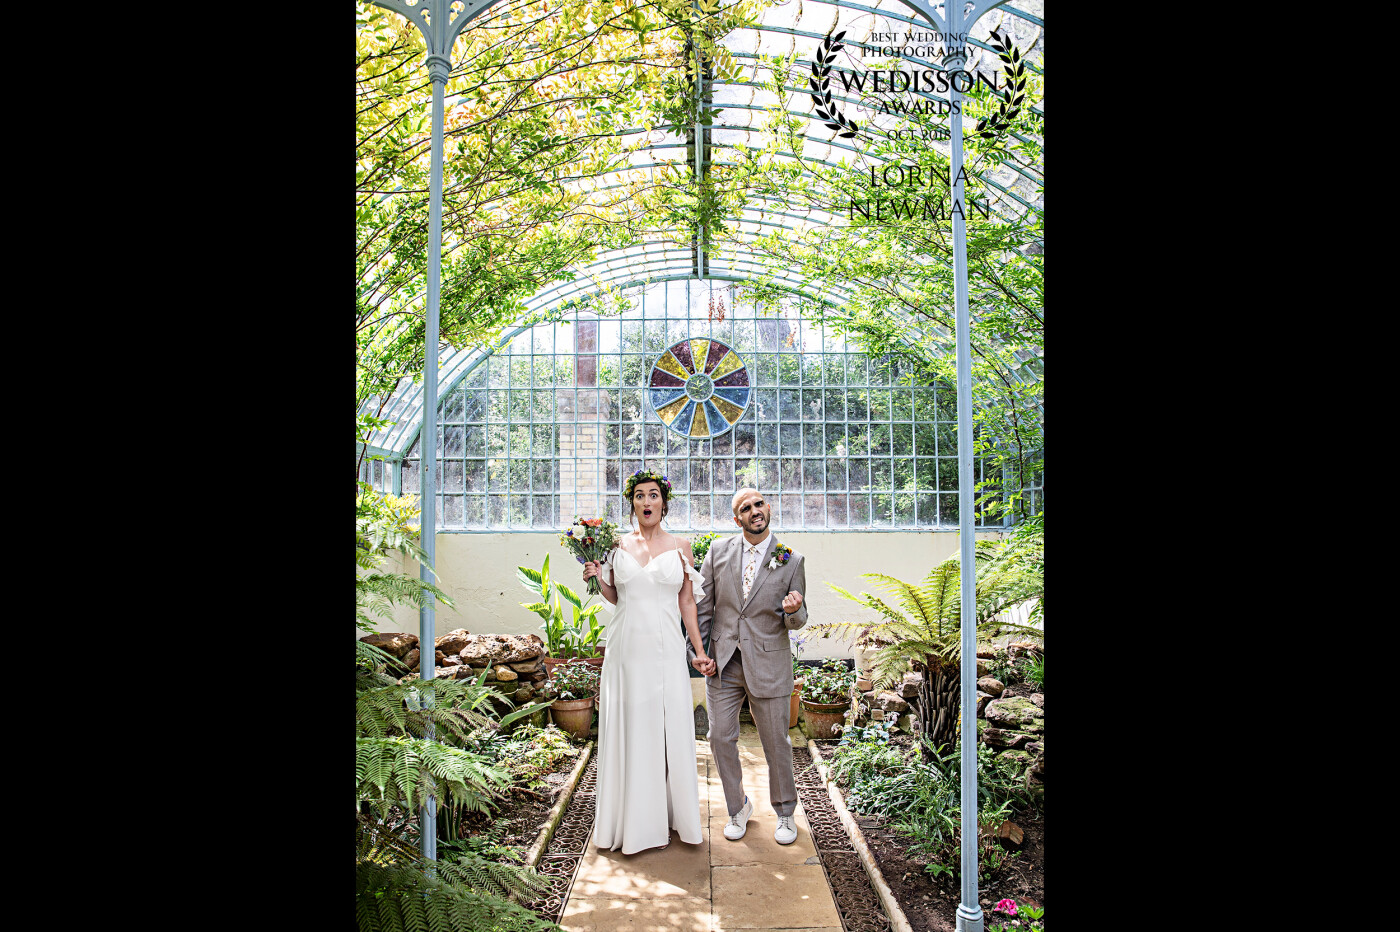 The grooms brother made his bride's wedding dress! Rainbow theme wild flowers and amazing bride & groom!!<br />
I had so much fun with Andrea & Antonio at the very beautiful Swiss Gardens & Shuttleworth House in Biggleswade. This was taken in the Swiss Gardens green house and it looks like Antonio knew this image would win an award! 